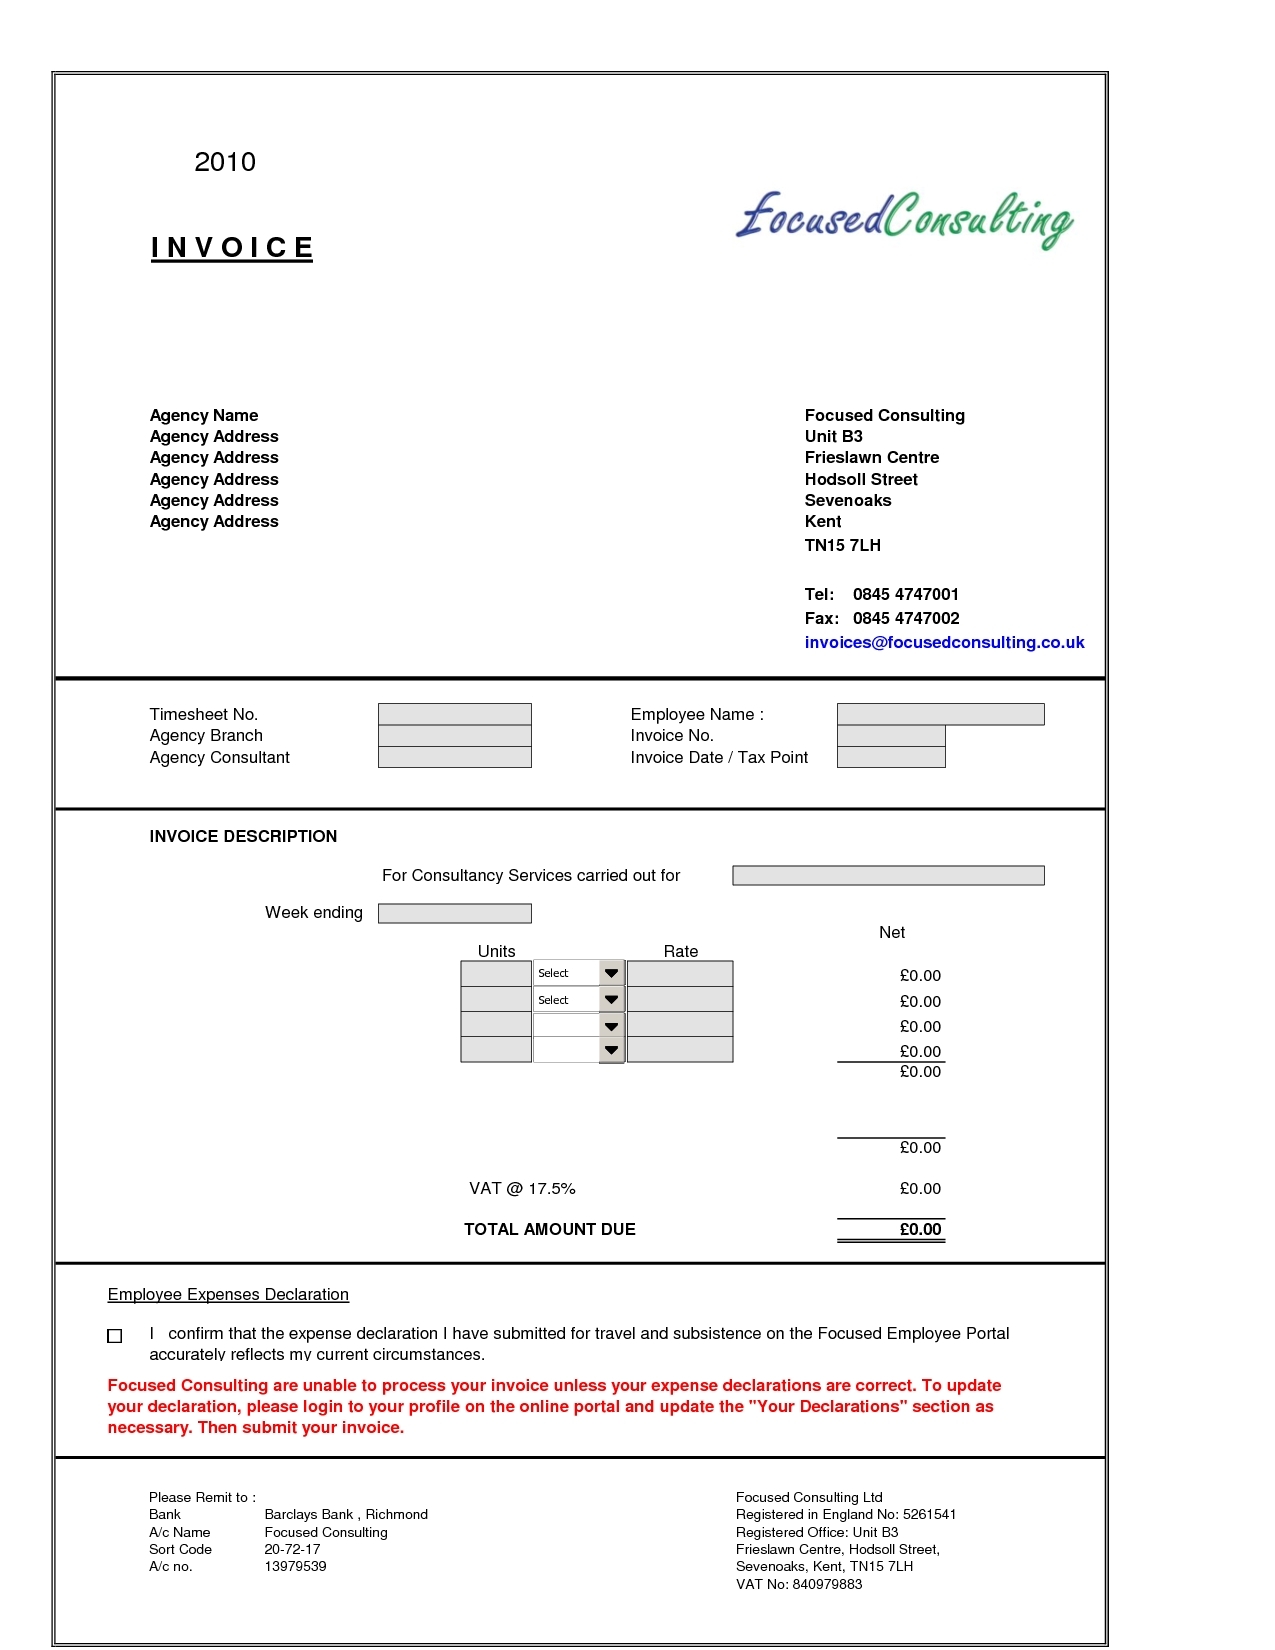 sample invoice consulting services